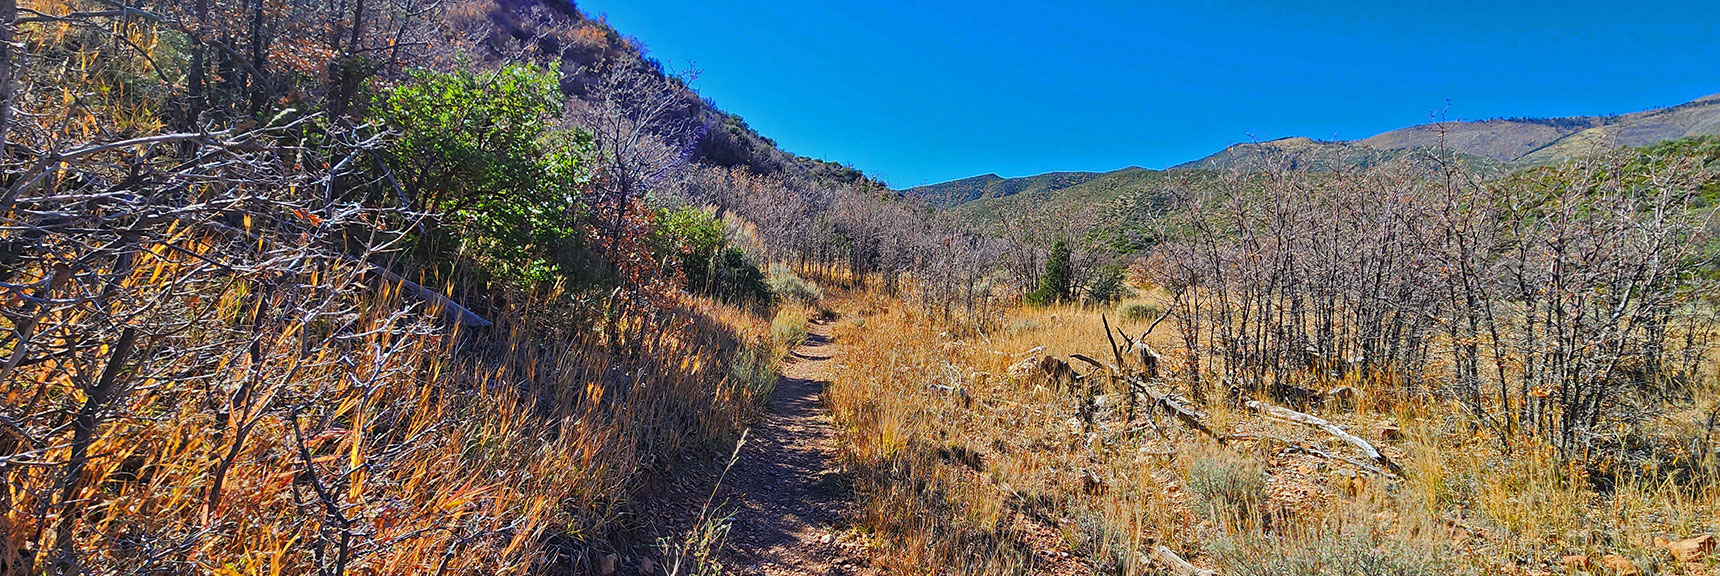 Heading Back Along North Base of Handy Peak to Loop Starting Point. | Schaefer Springs Loop Trail | Lovell Canyon, Nevada